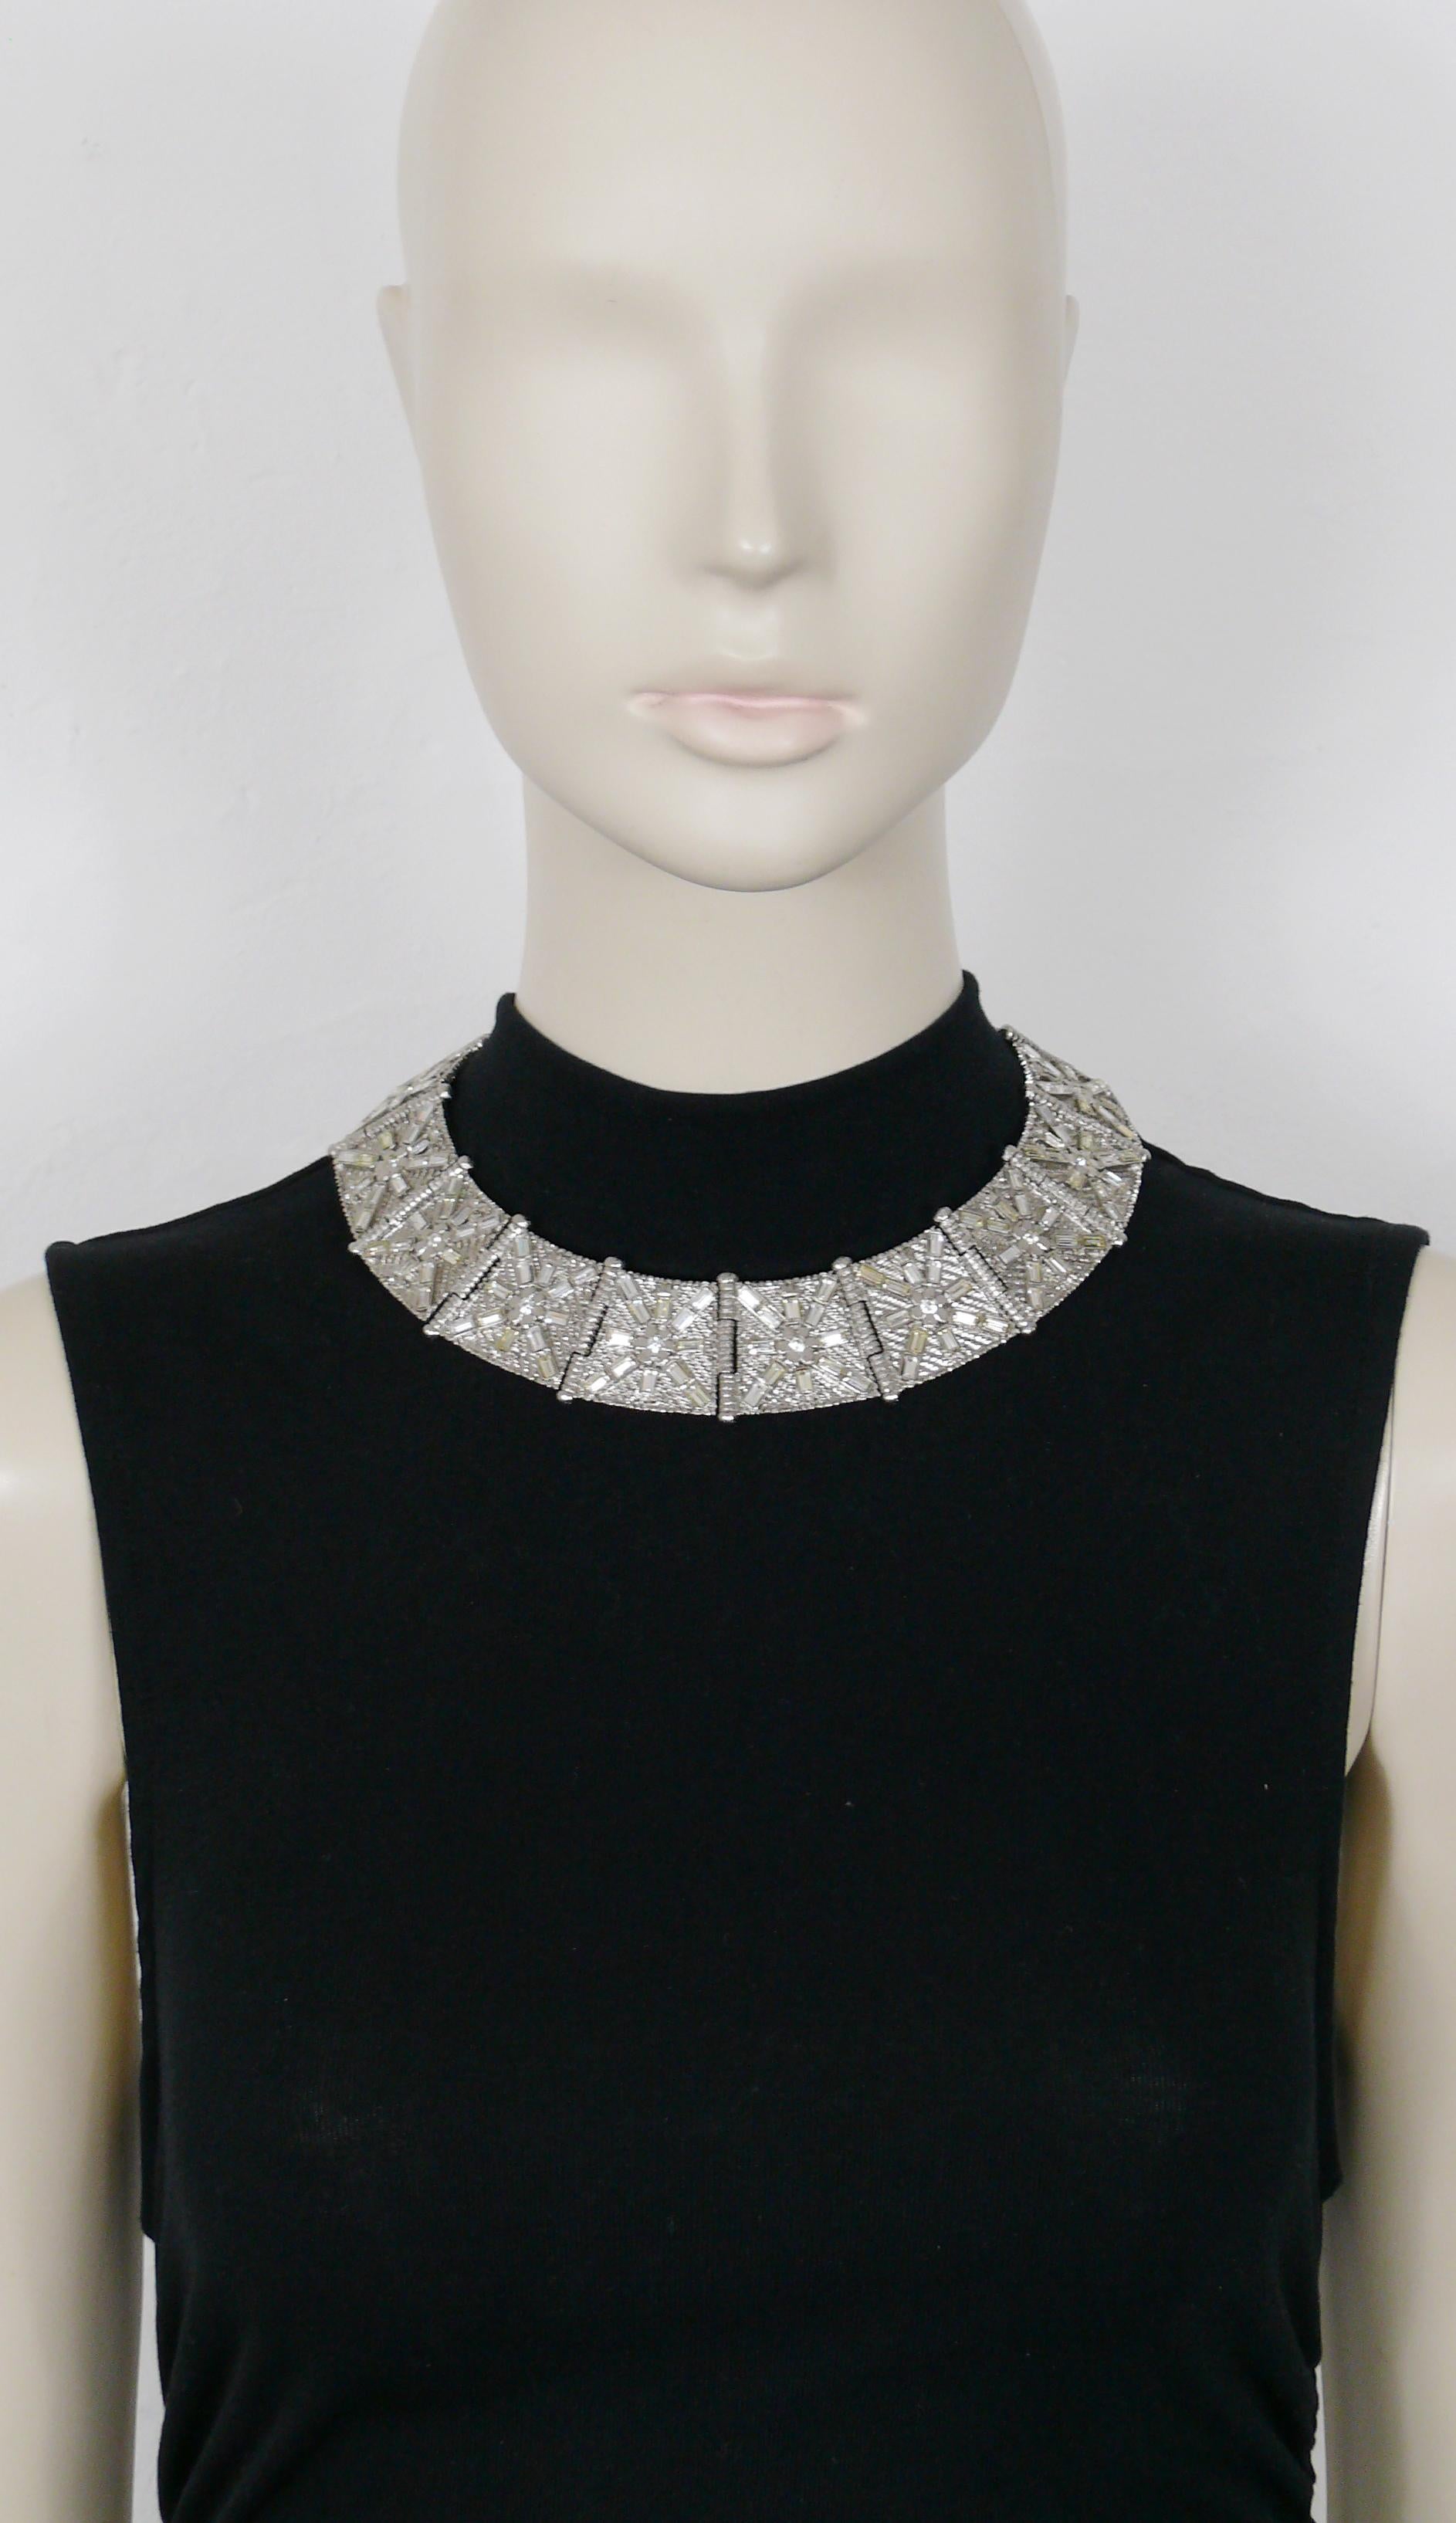 JEAN LOUIS SCHERRER vintage ART DECO design inspired articulated collar necklace embellished with clear crystals.

Silver tone metal hardware.

Hook clasp closure.

Marked SCHERRER Paris Made in France.

Indicative measurements : inner circumference